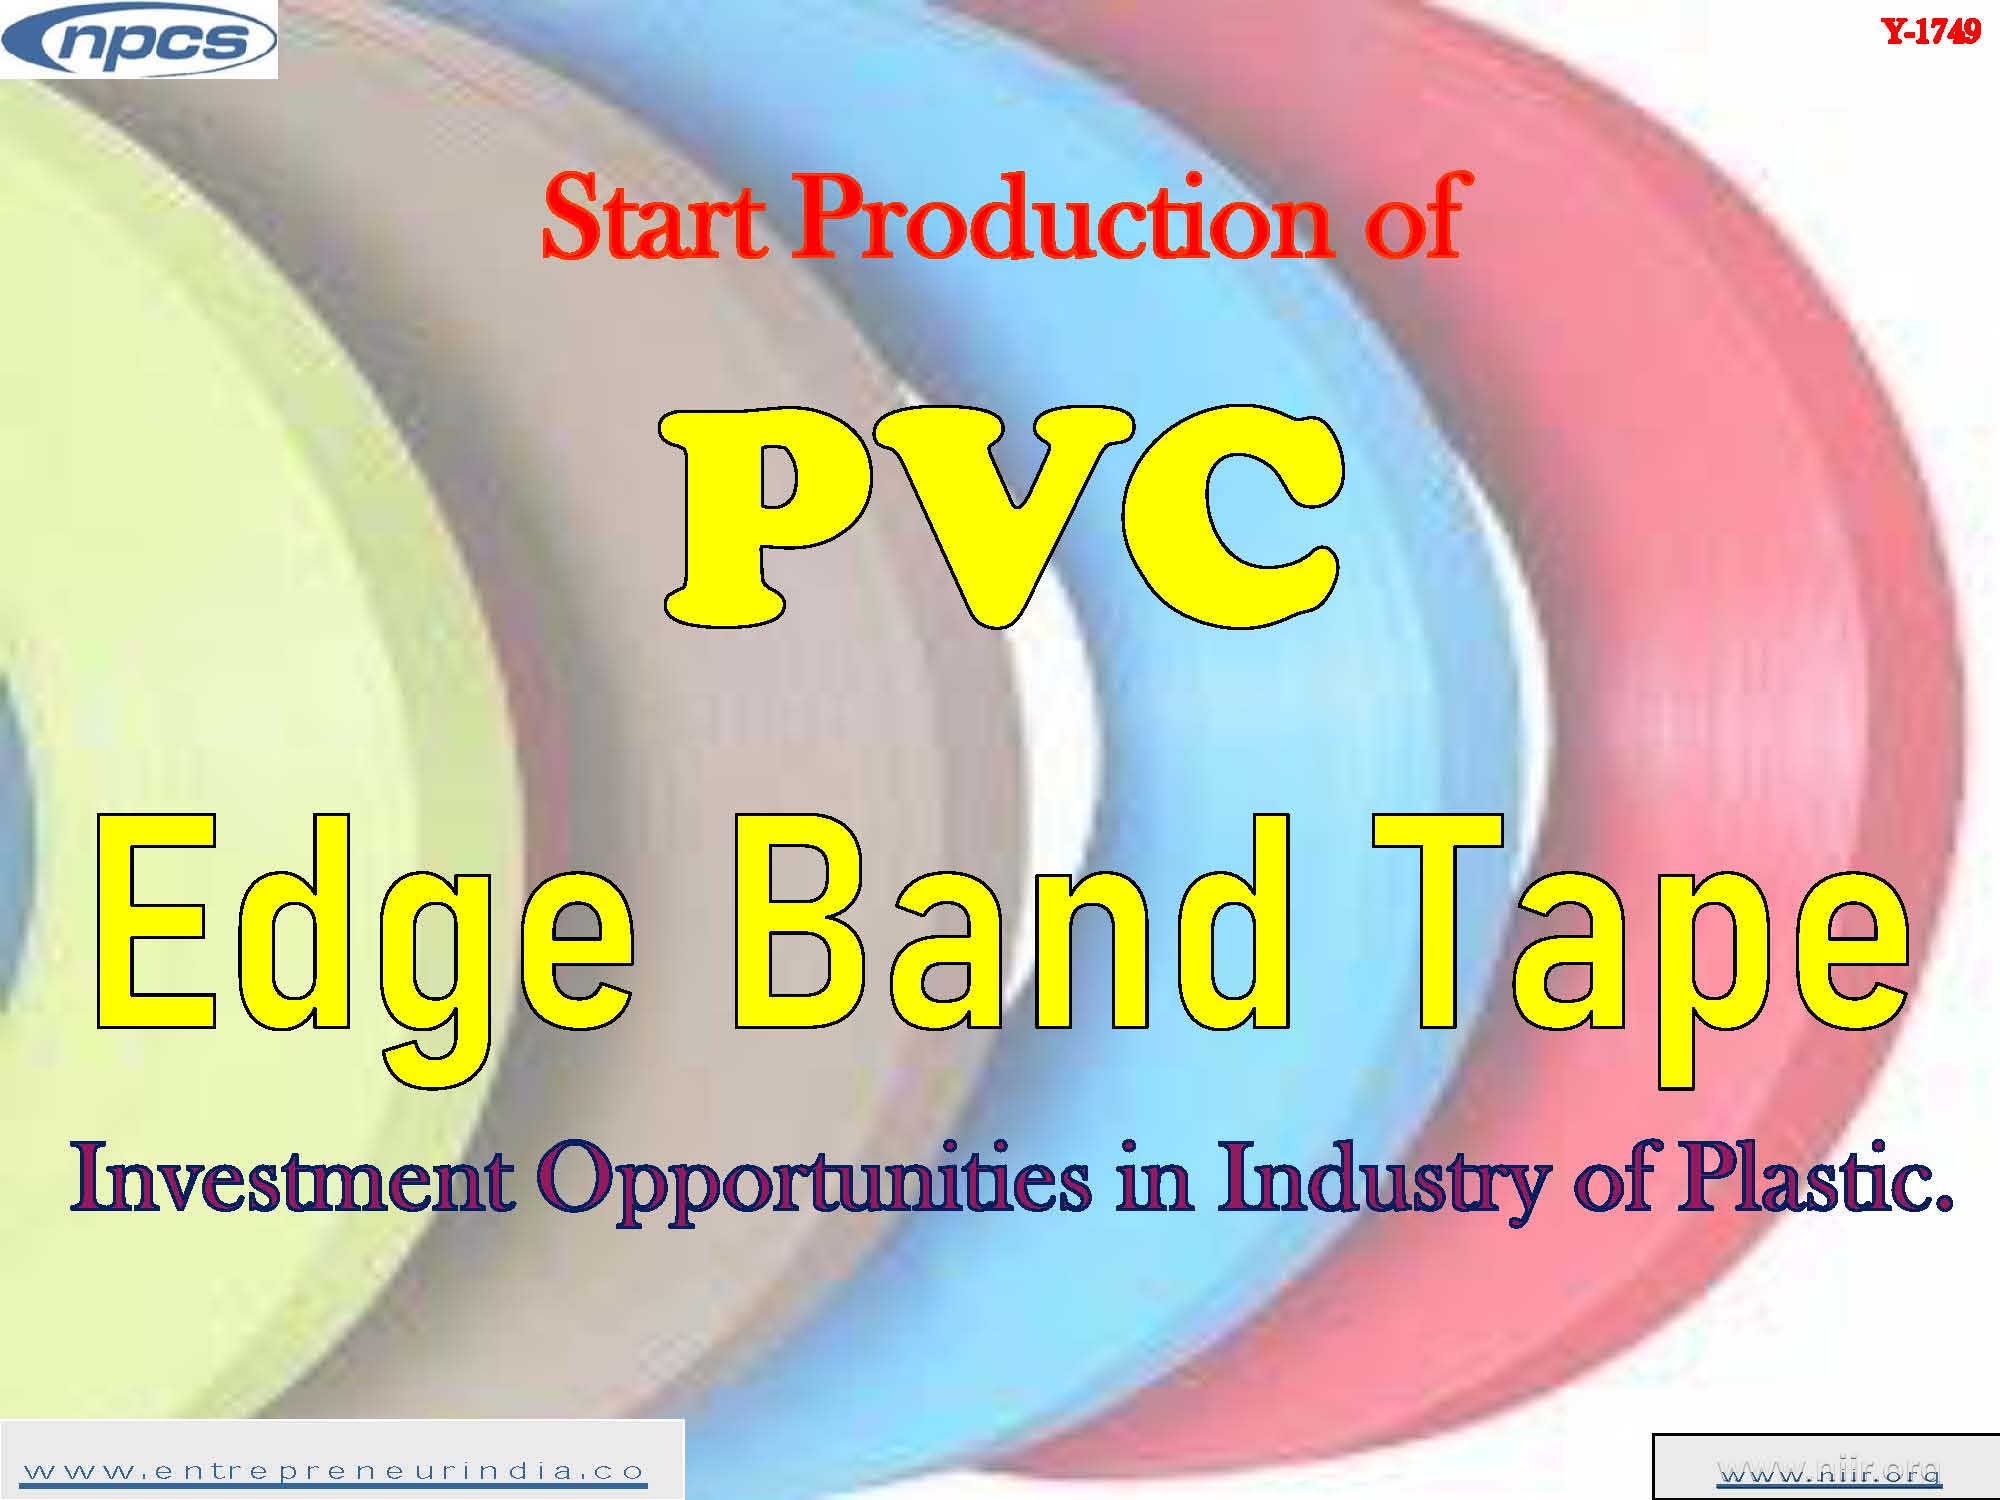 Start Production of PVC Edge Band Tape, Investment Opportunities in Industry of Plastic